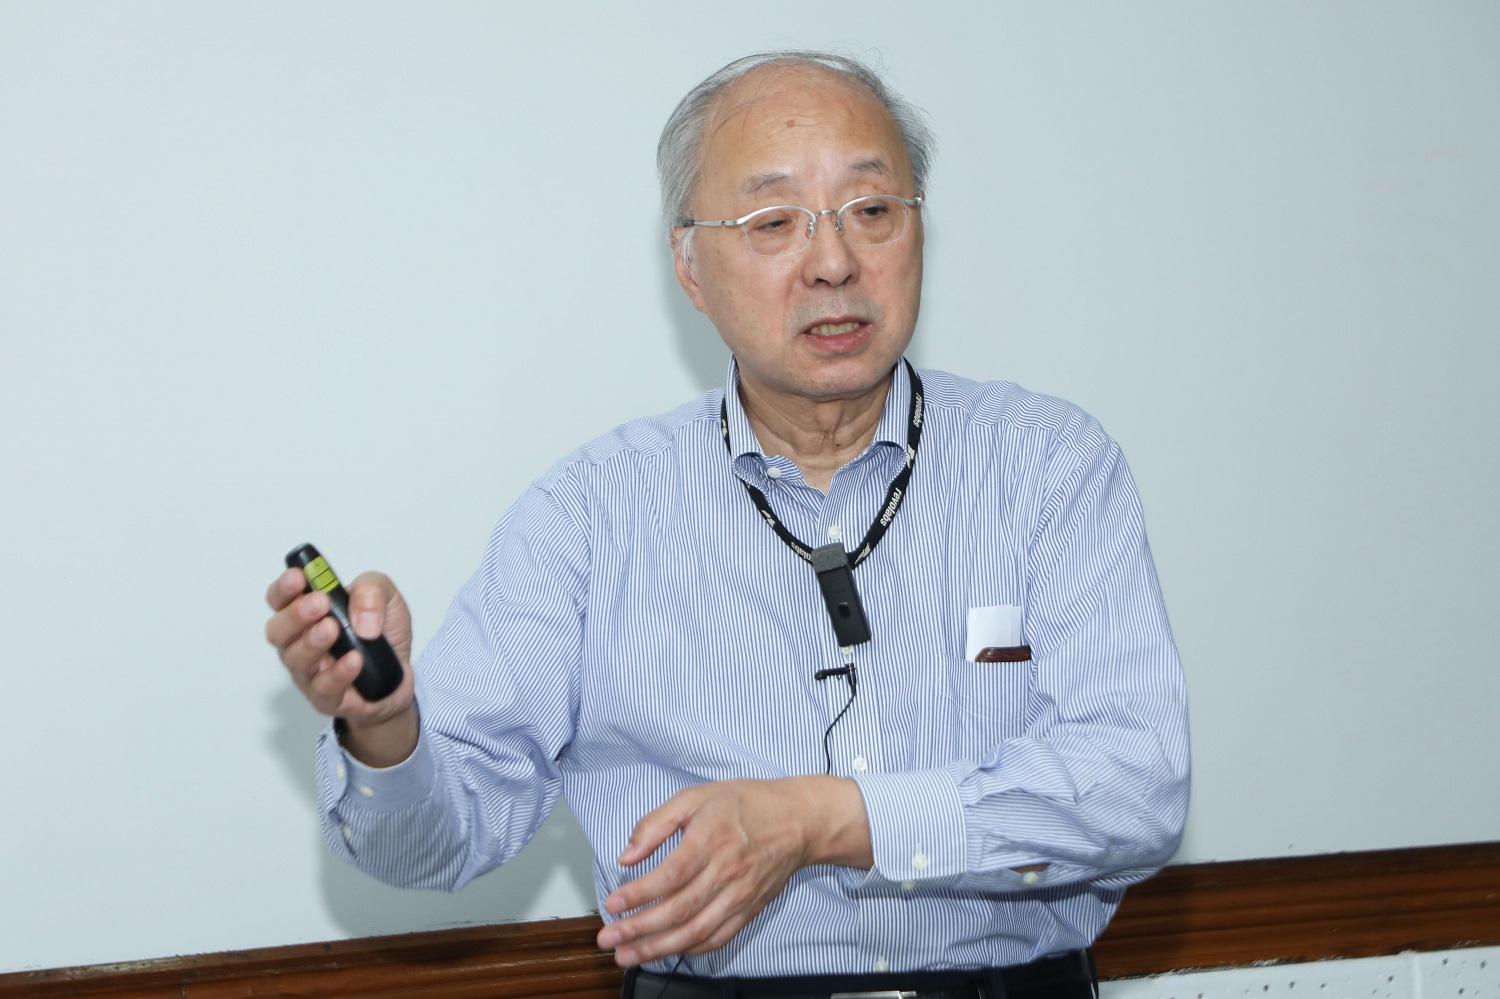 Masami Shimizu, Executive Office Fellow of Mitsubishi Heavy Industries Ltd., delivers a talk titled, ‘How Japanese Manufacturing Firms Maintain Competitiveness for Sustainable Growth’, on 18th February 2023, hosted by the Post Graduate Programme in Enterprise Management (PGPEM) cohort.